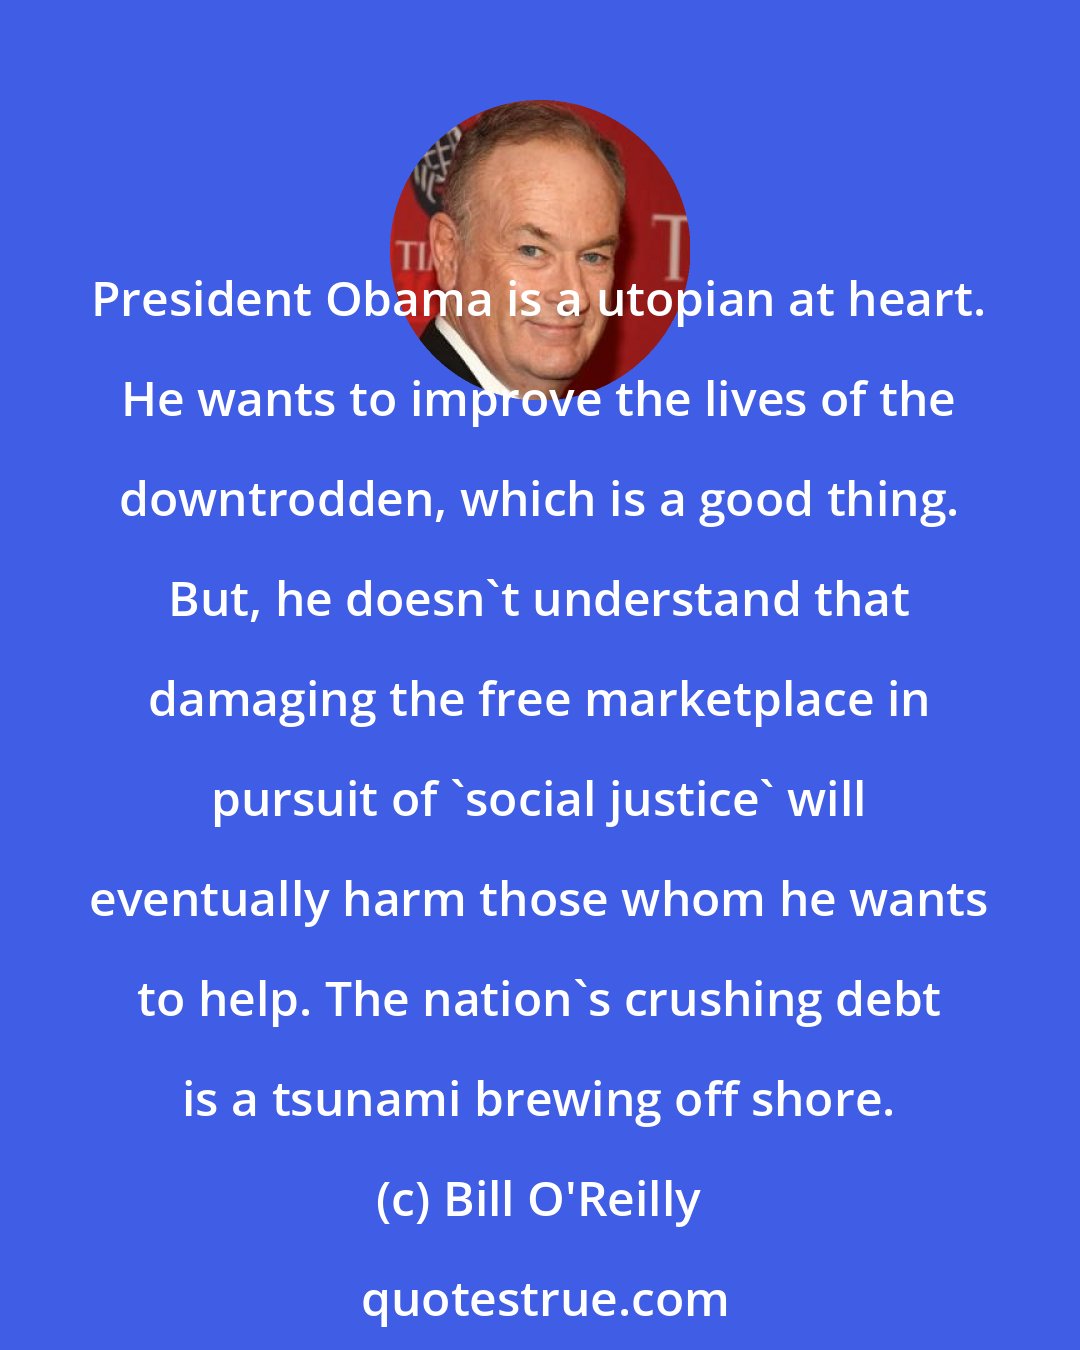 Bill O'Reilly: President Obama is a utopian at heart. He wants to improve the lives of the downtrodden, which is a good thing. But, he doesn't understand that damaging the free marketplace in pursuit of 'social justice' will eventually harm those whom he wants to help. The nation's crushing debt is a tsunami brewing off shore.